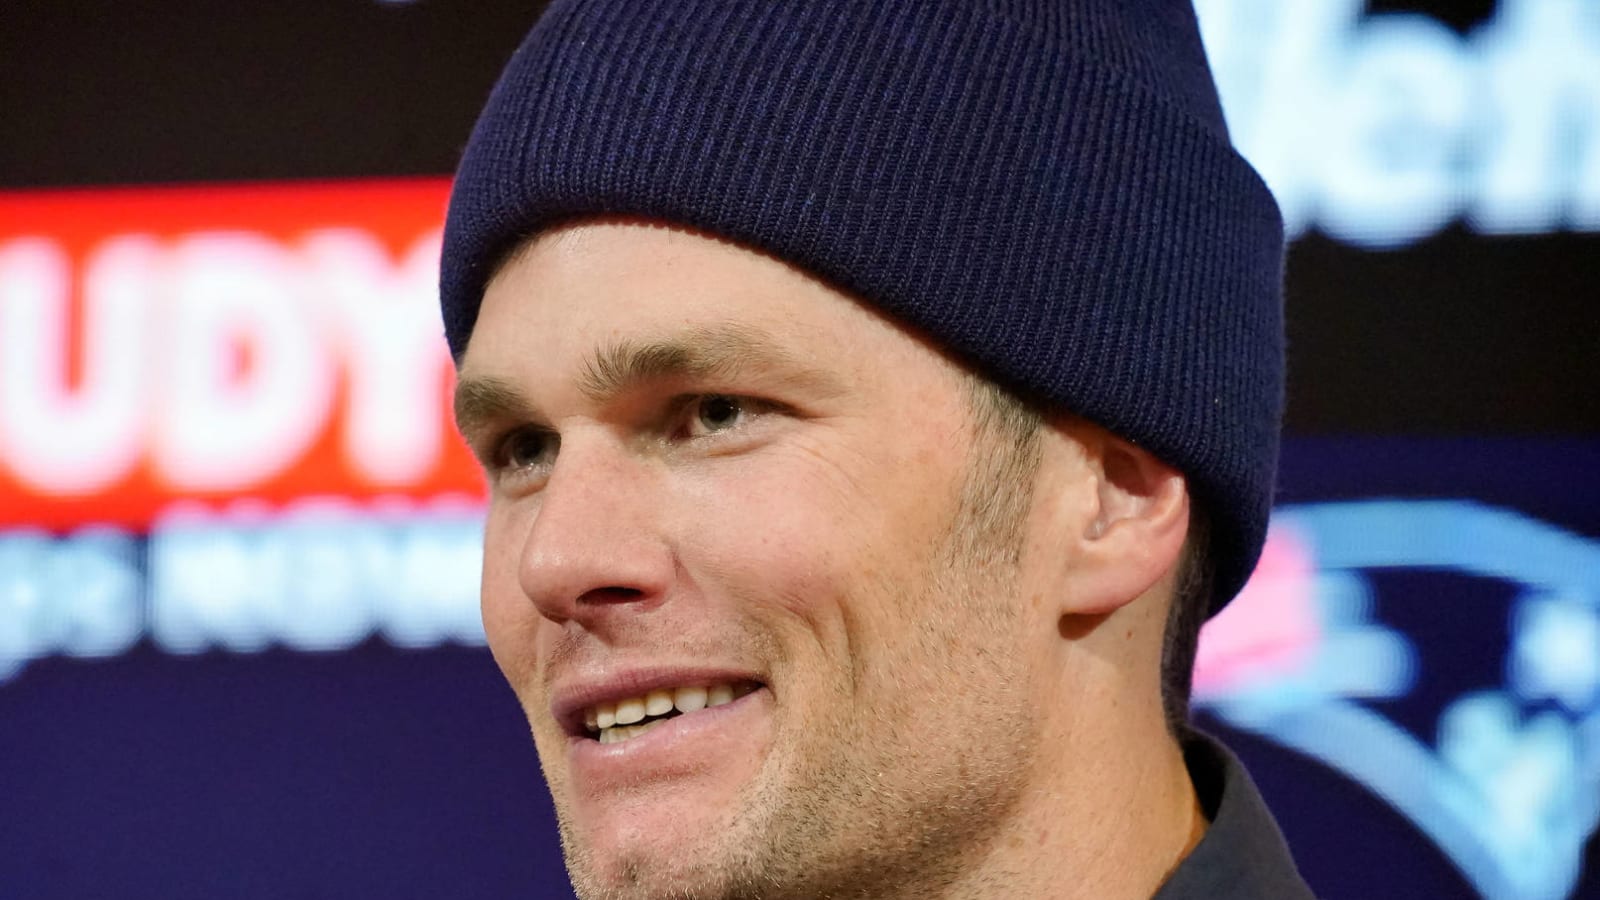 Boston mayor offers to name iconic buildings after Tom Brady if he stays